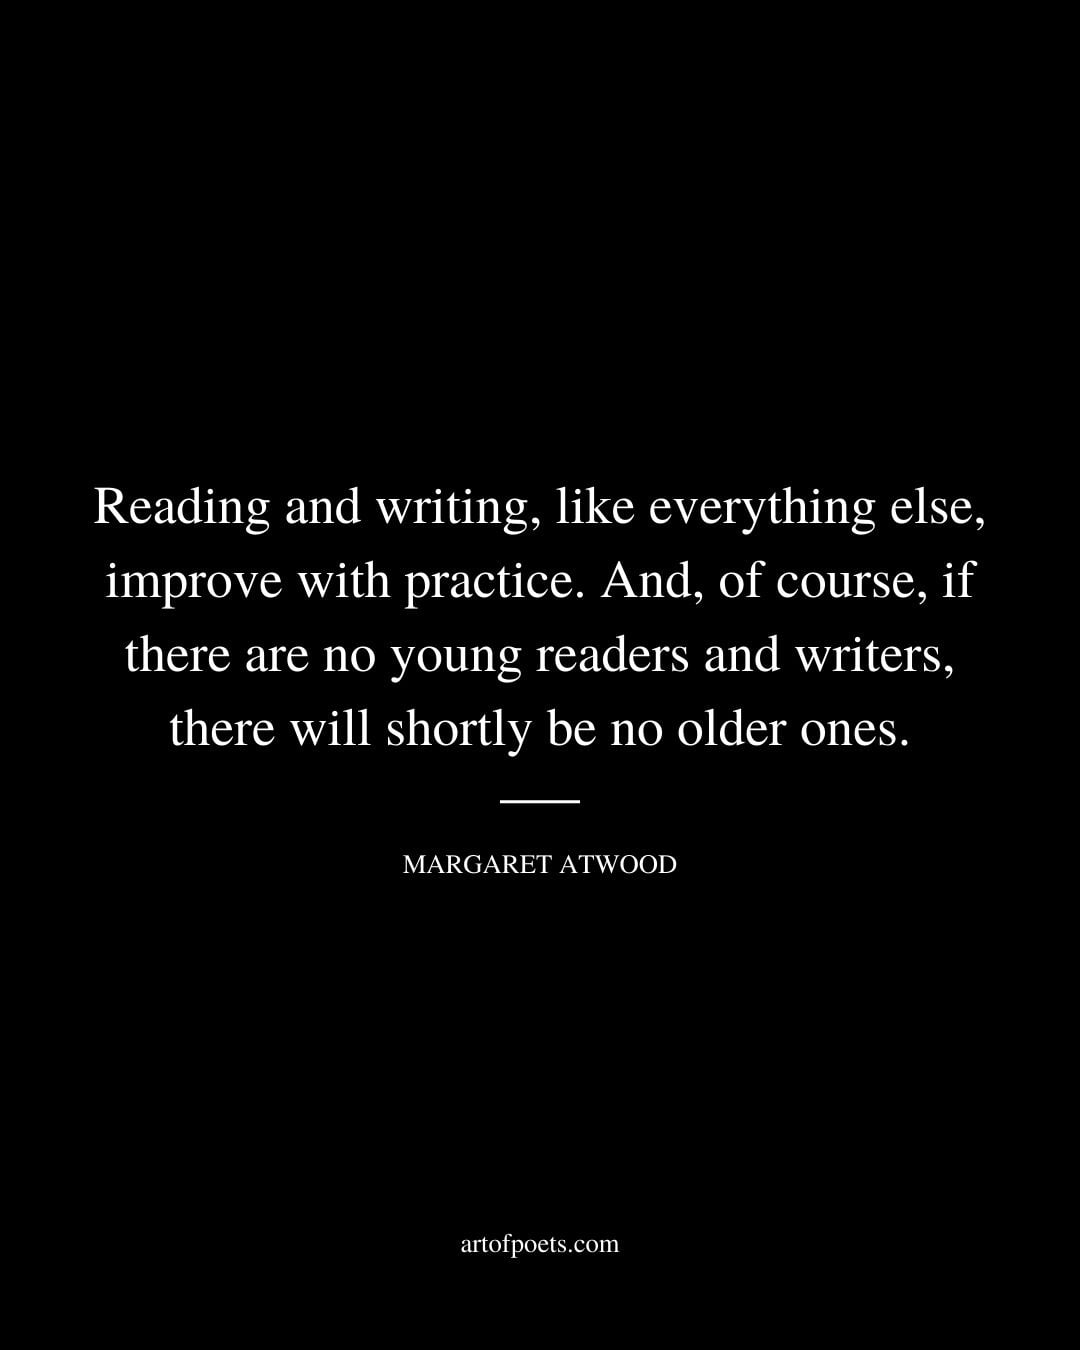 Reading and writing like everything else improve with practice. And of course if there are no young readers and writers there will shortly be no older ones. Margaret Atwood